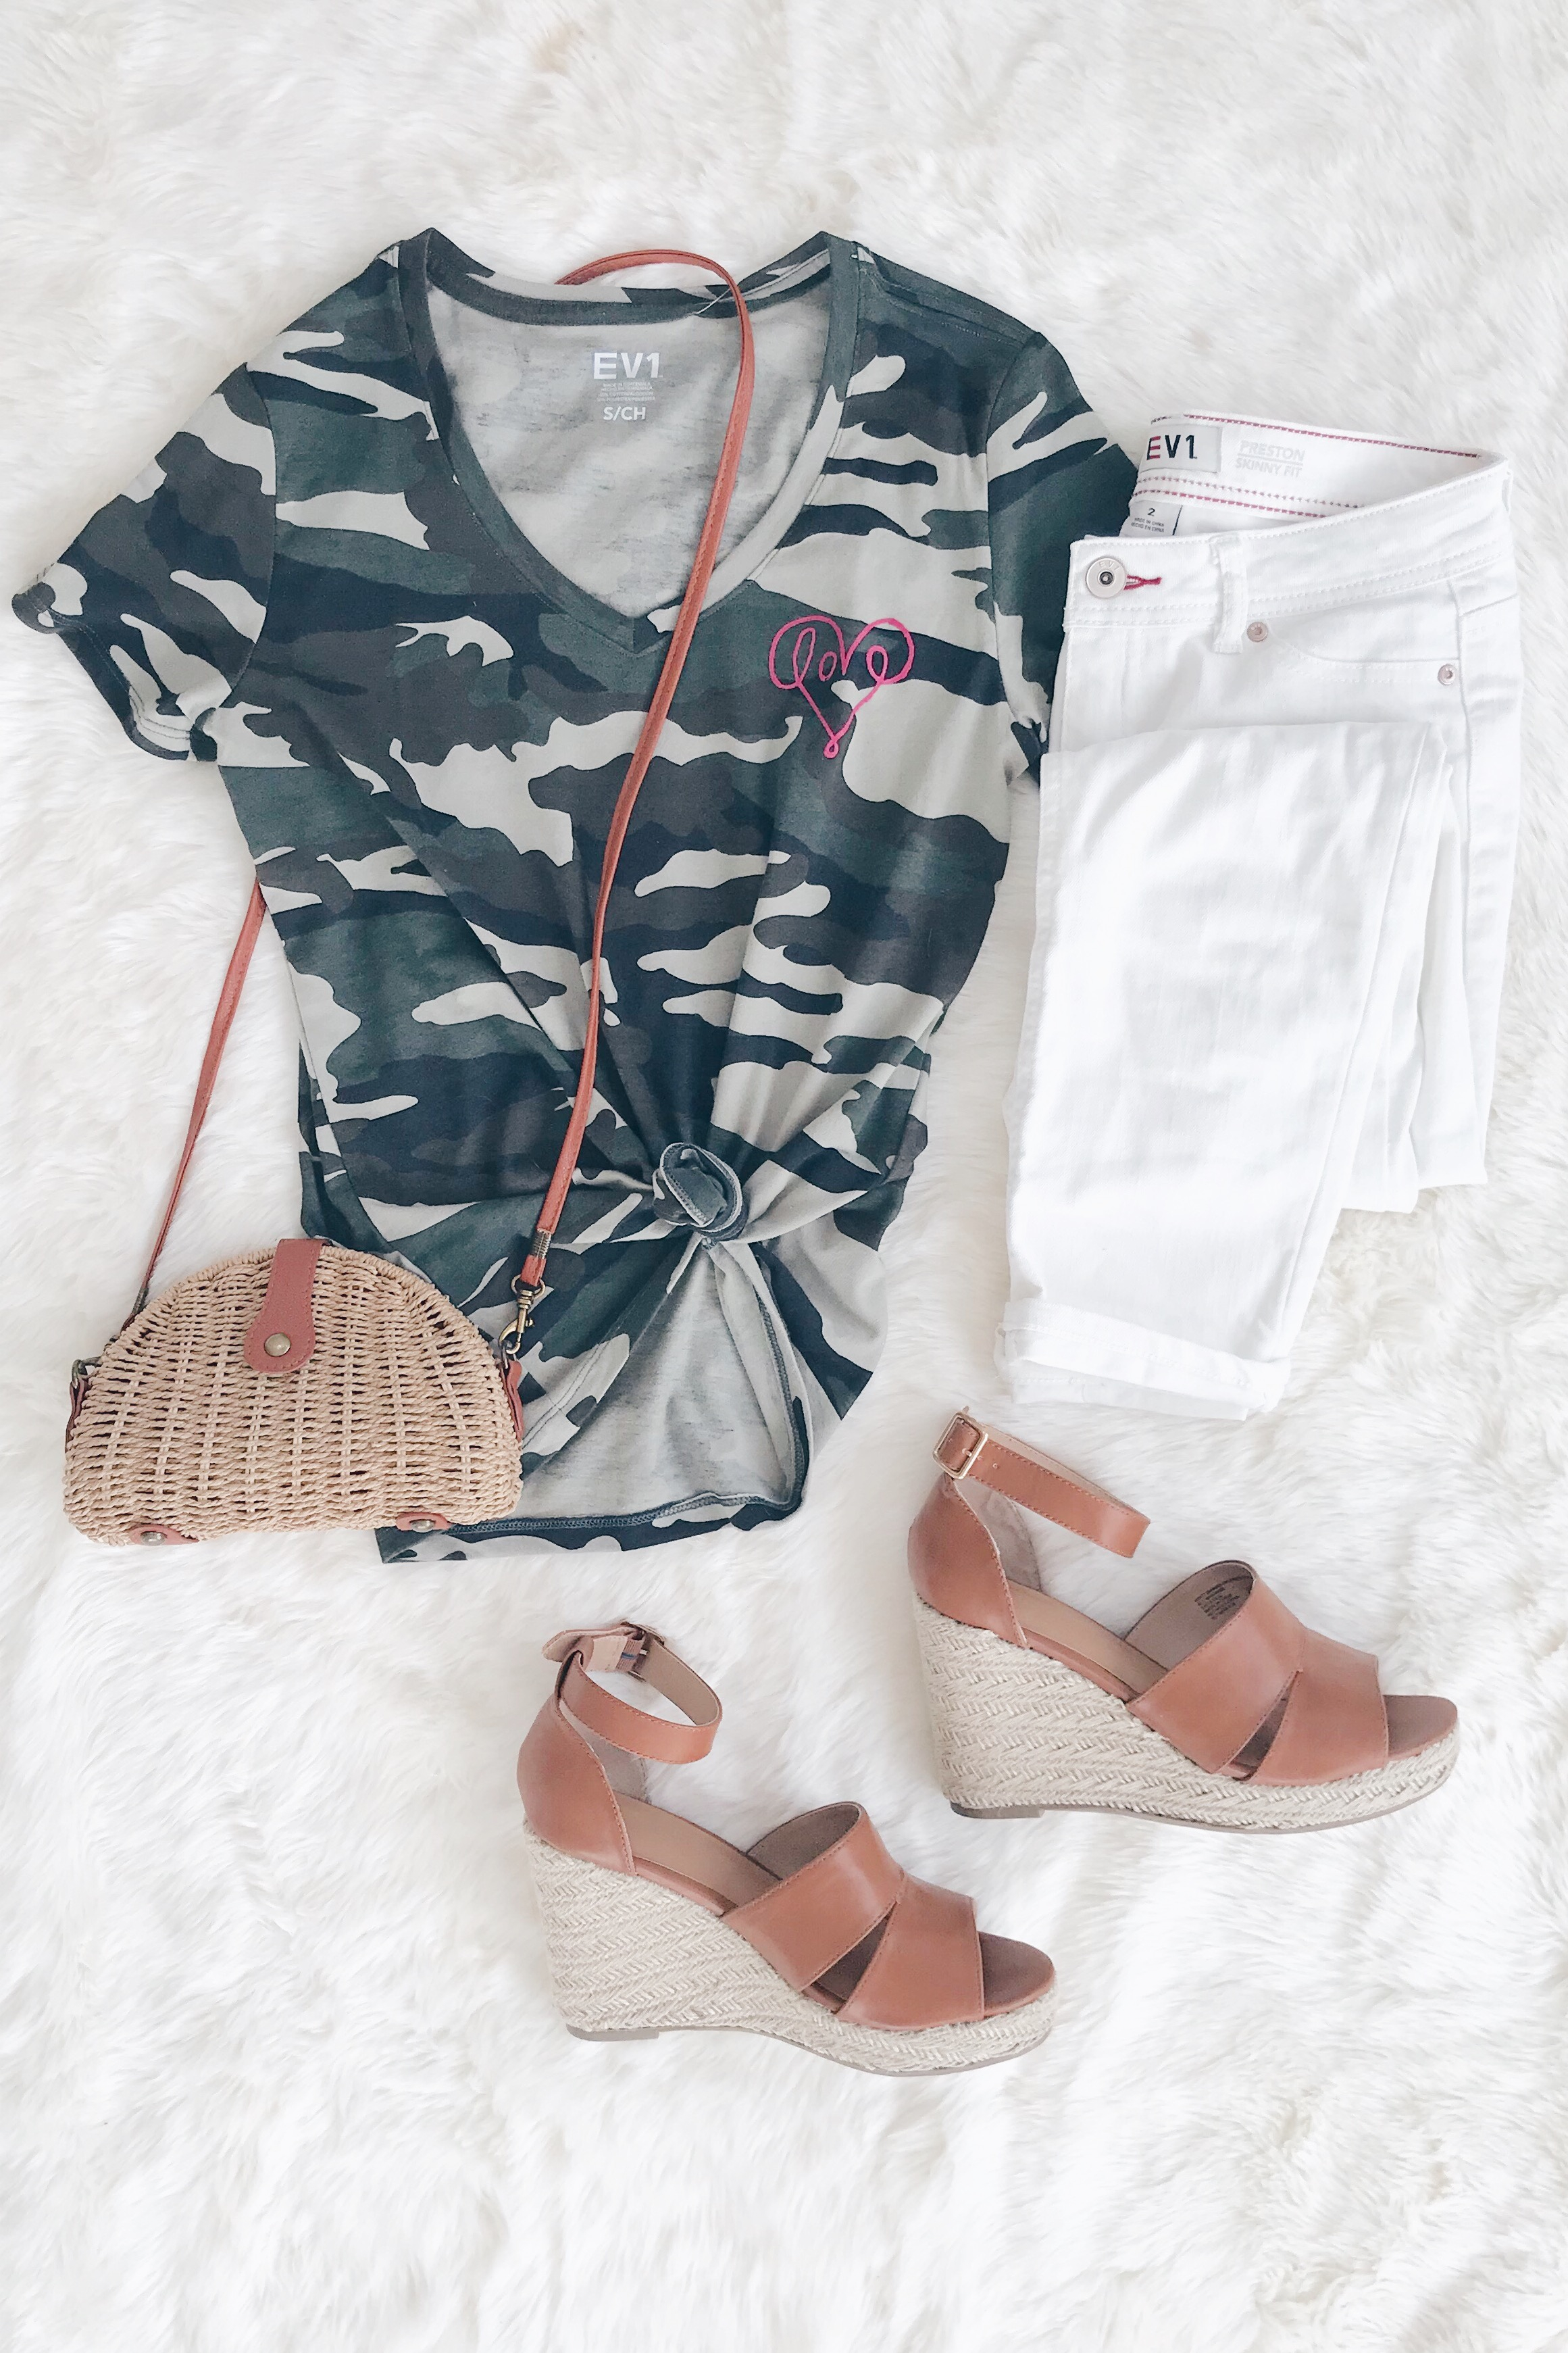 How to Wear a Camo Tee | Styling Camo for Spring